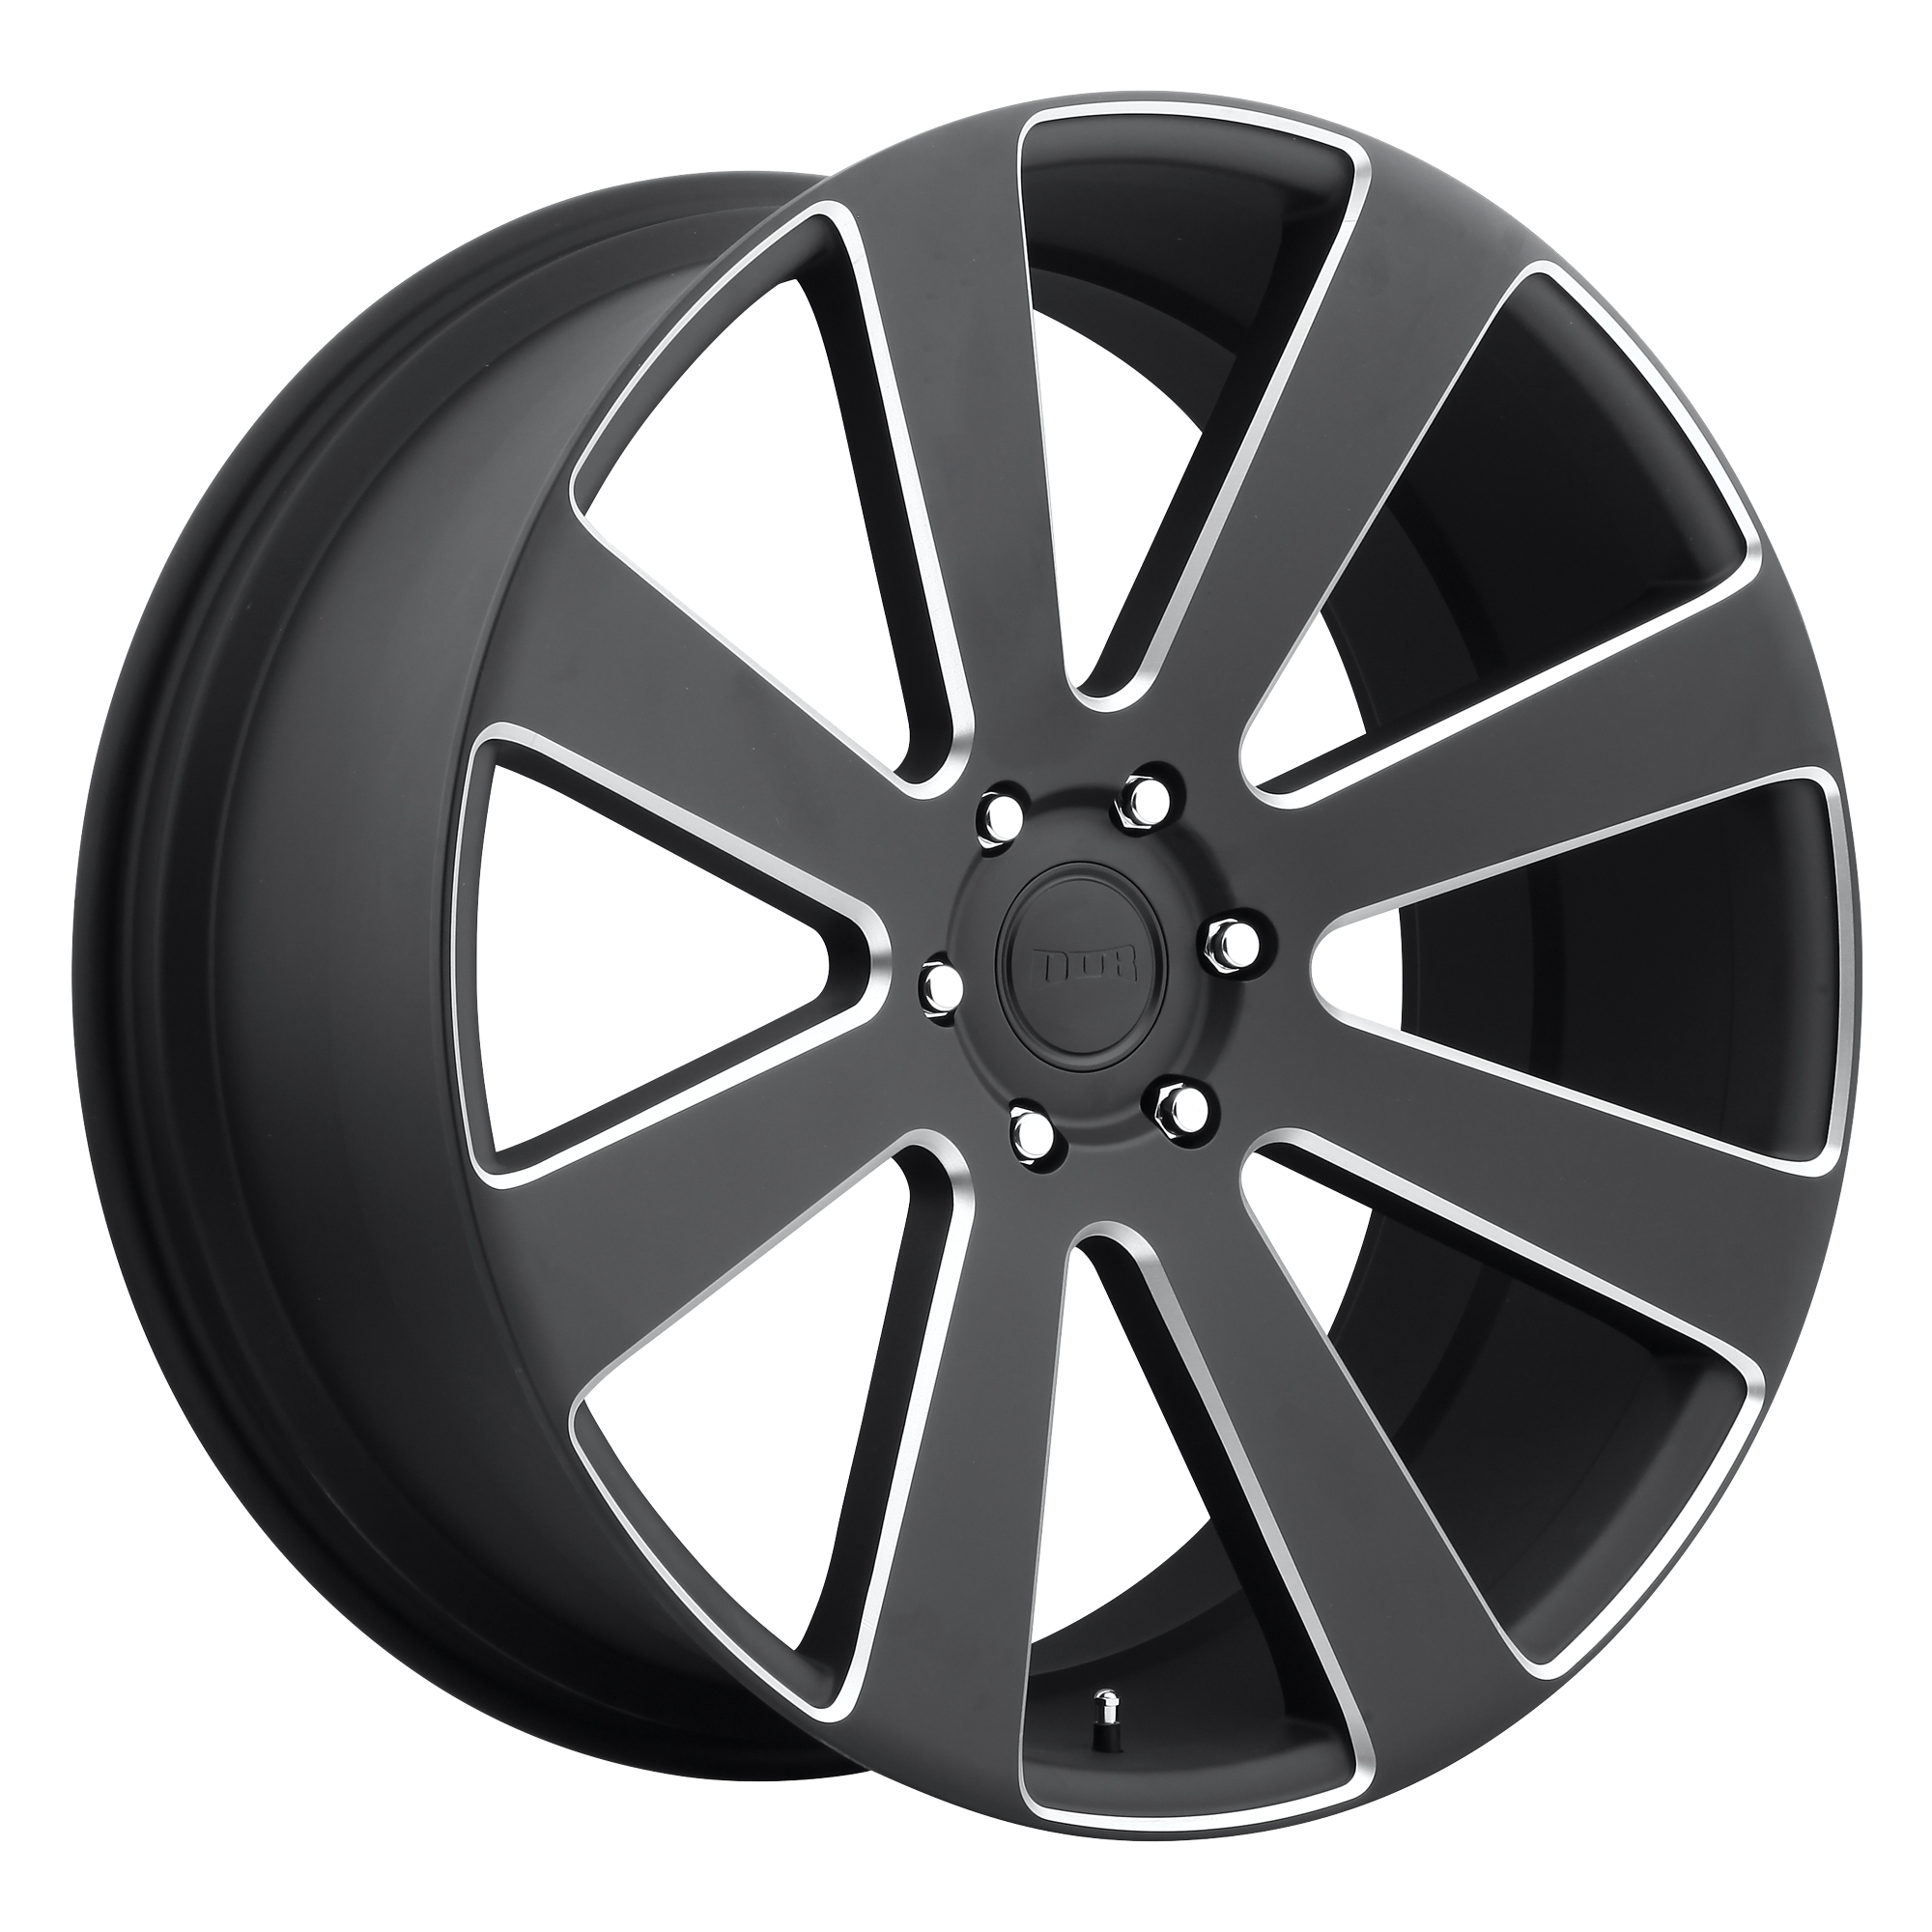 8-BALL 22x9.5 6x139.70 MATTE BLACK MILLED (20 mm) - Tires and Engine Performance